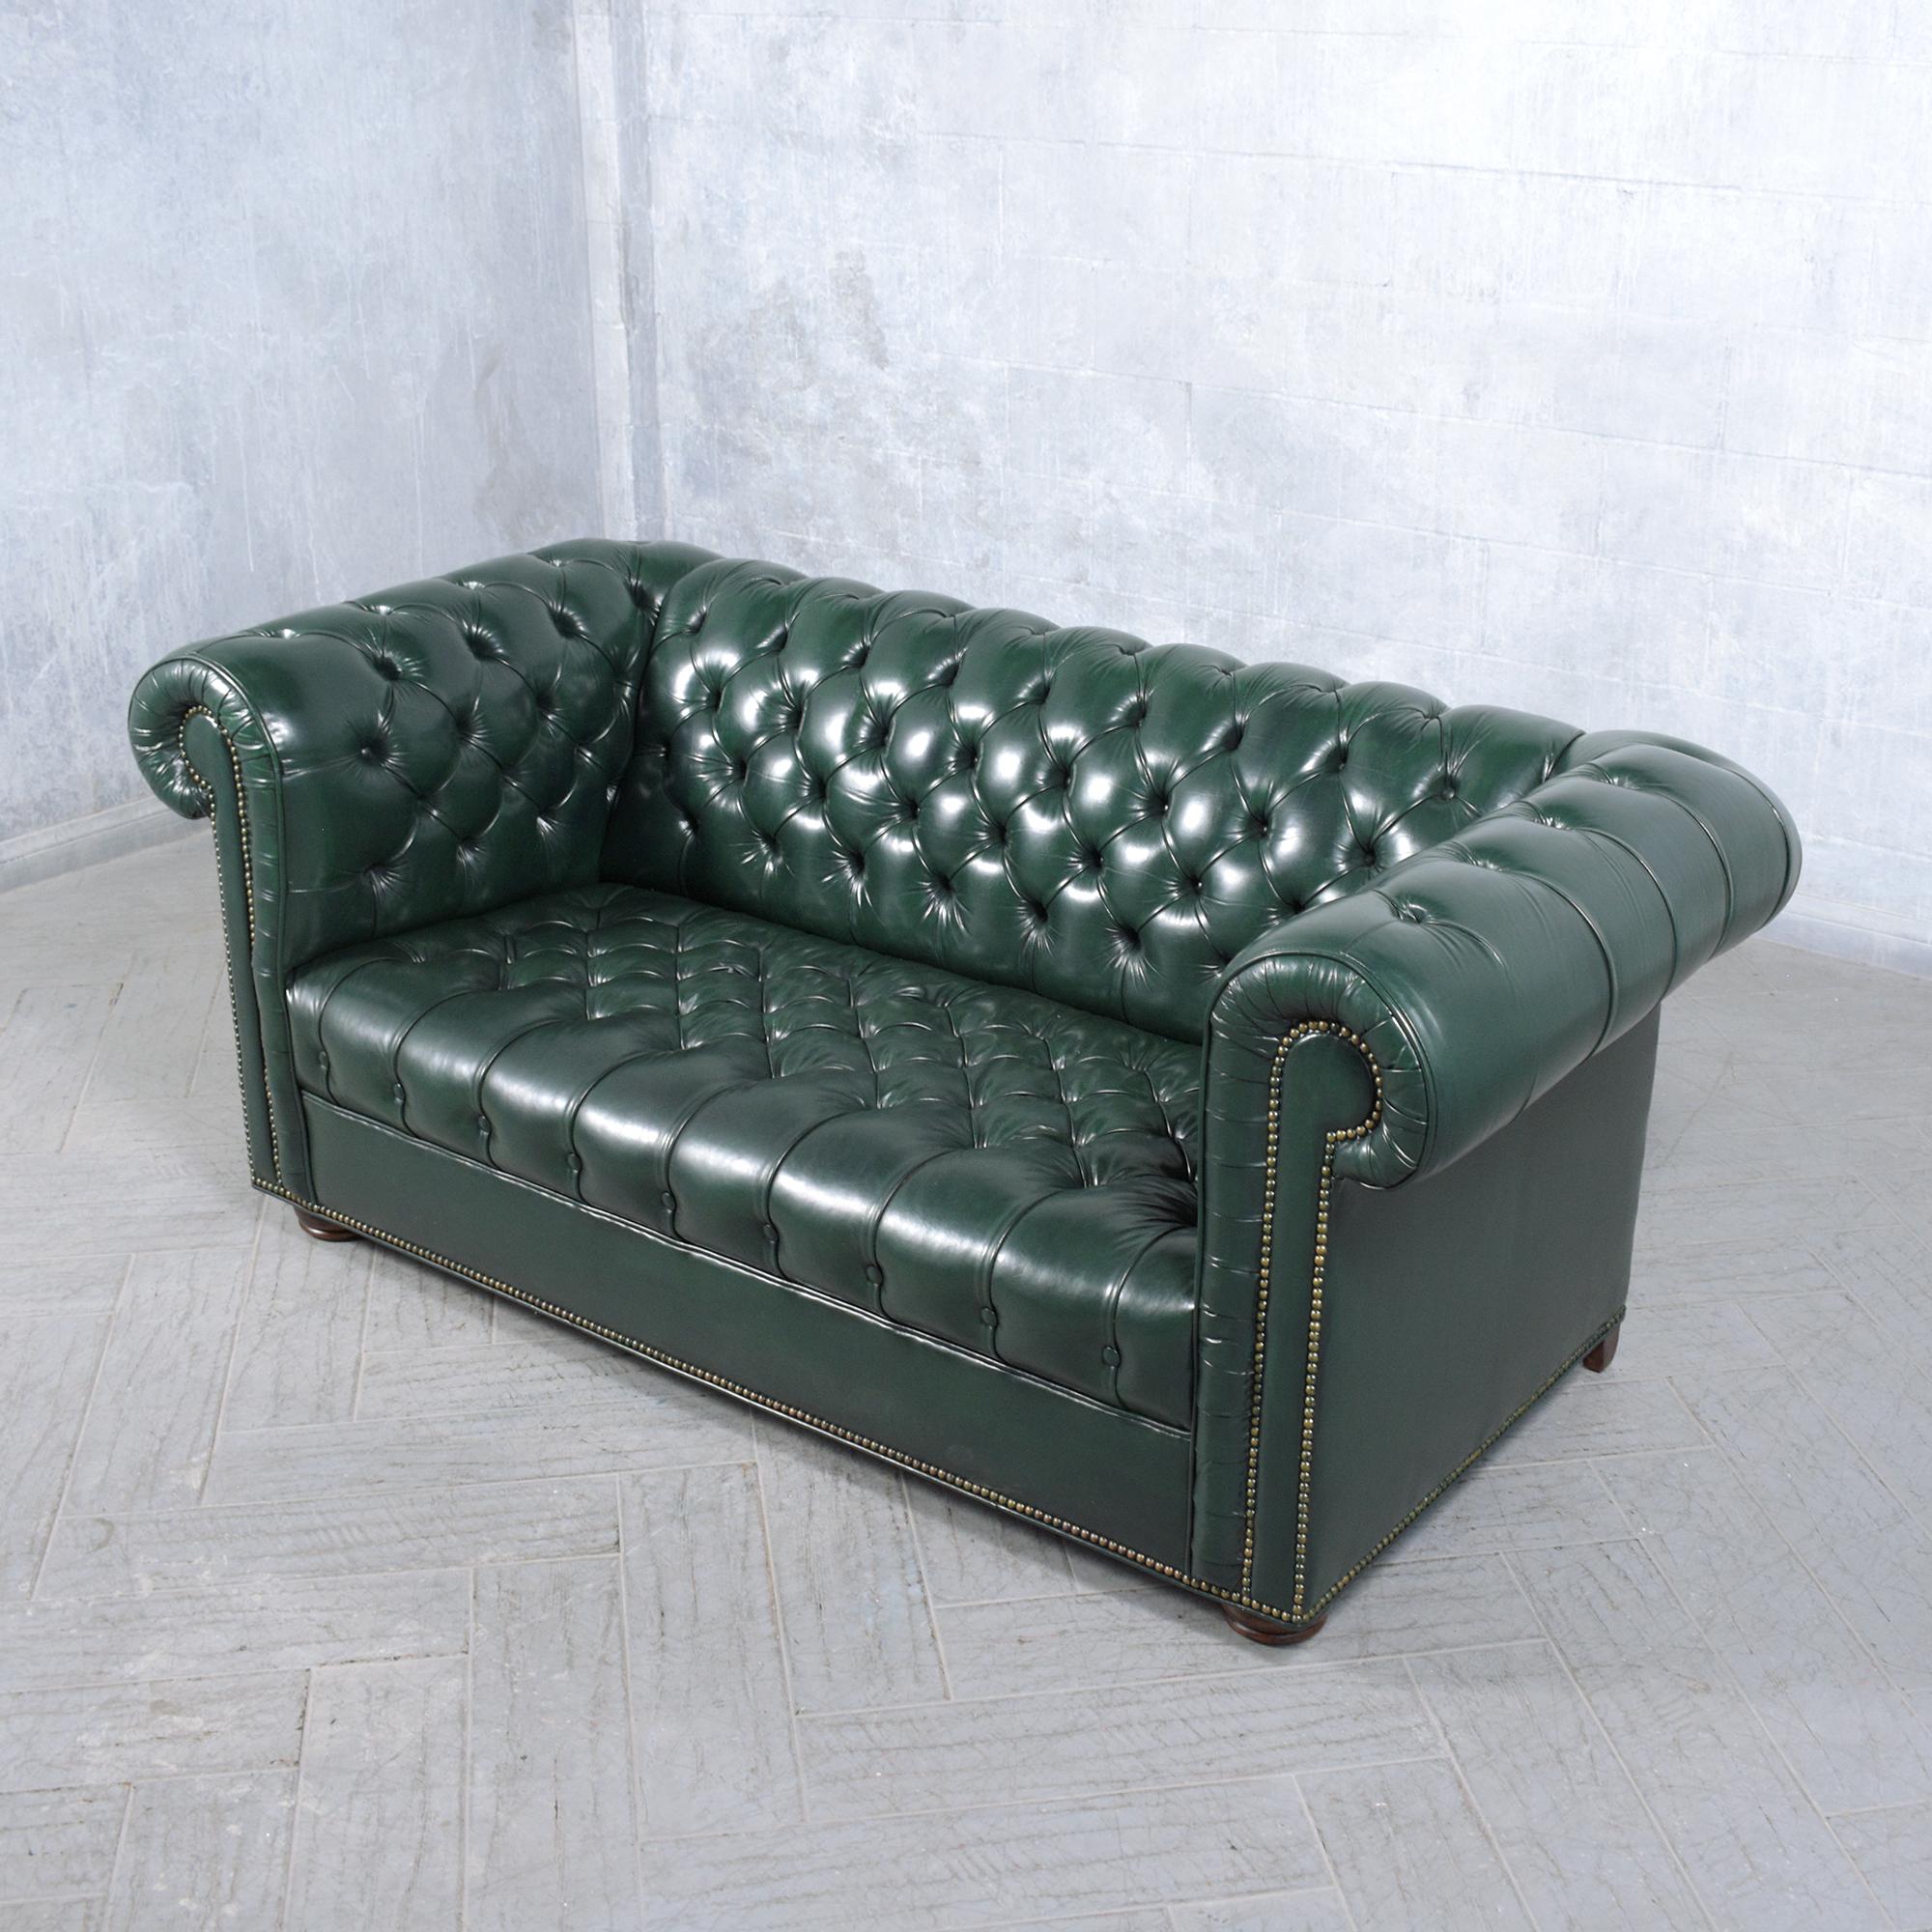 Brass 1970s Vintage Chesterfield Sofa: Emerald Green Leather with Elegant Carved Legs